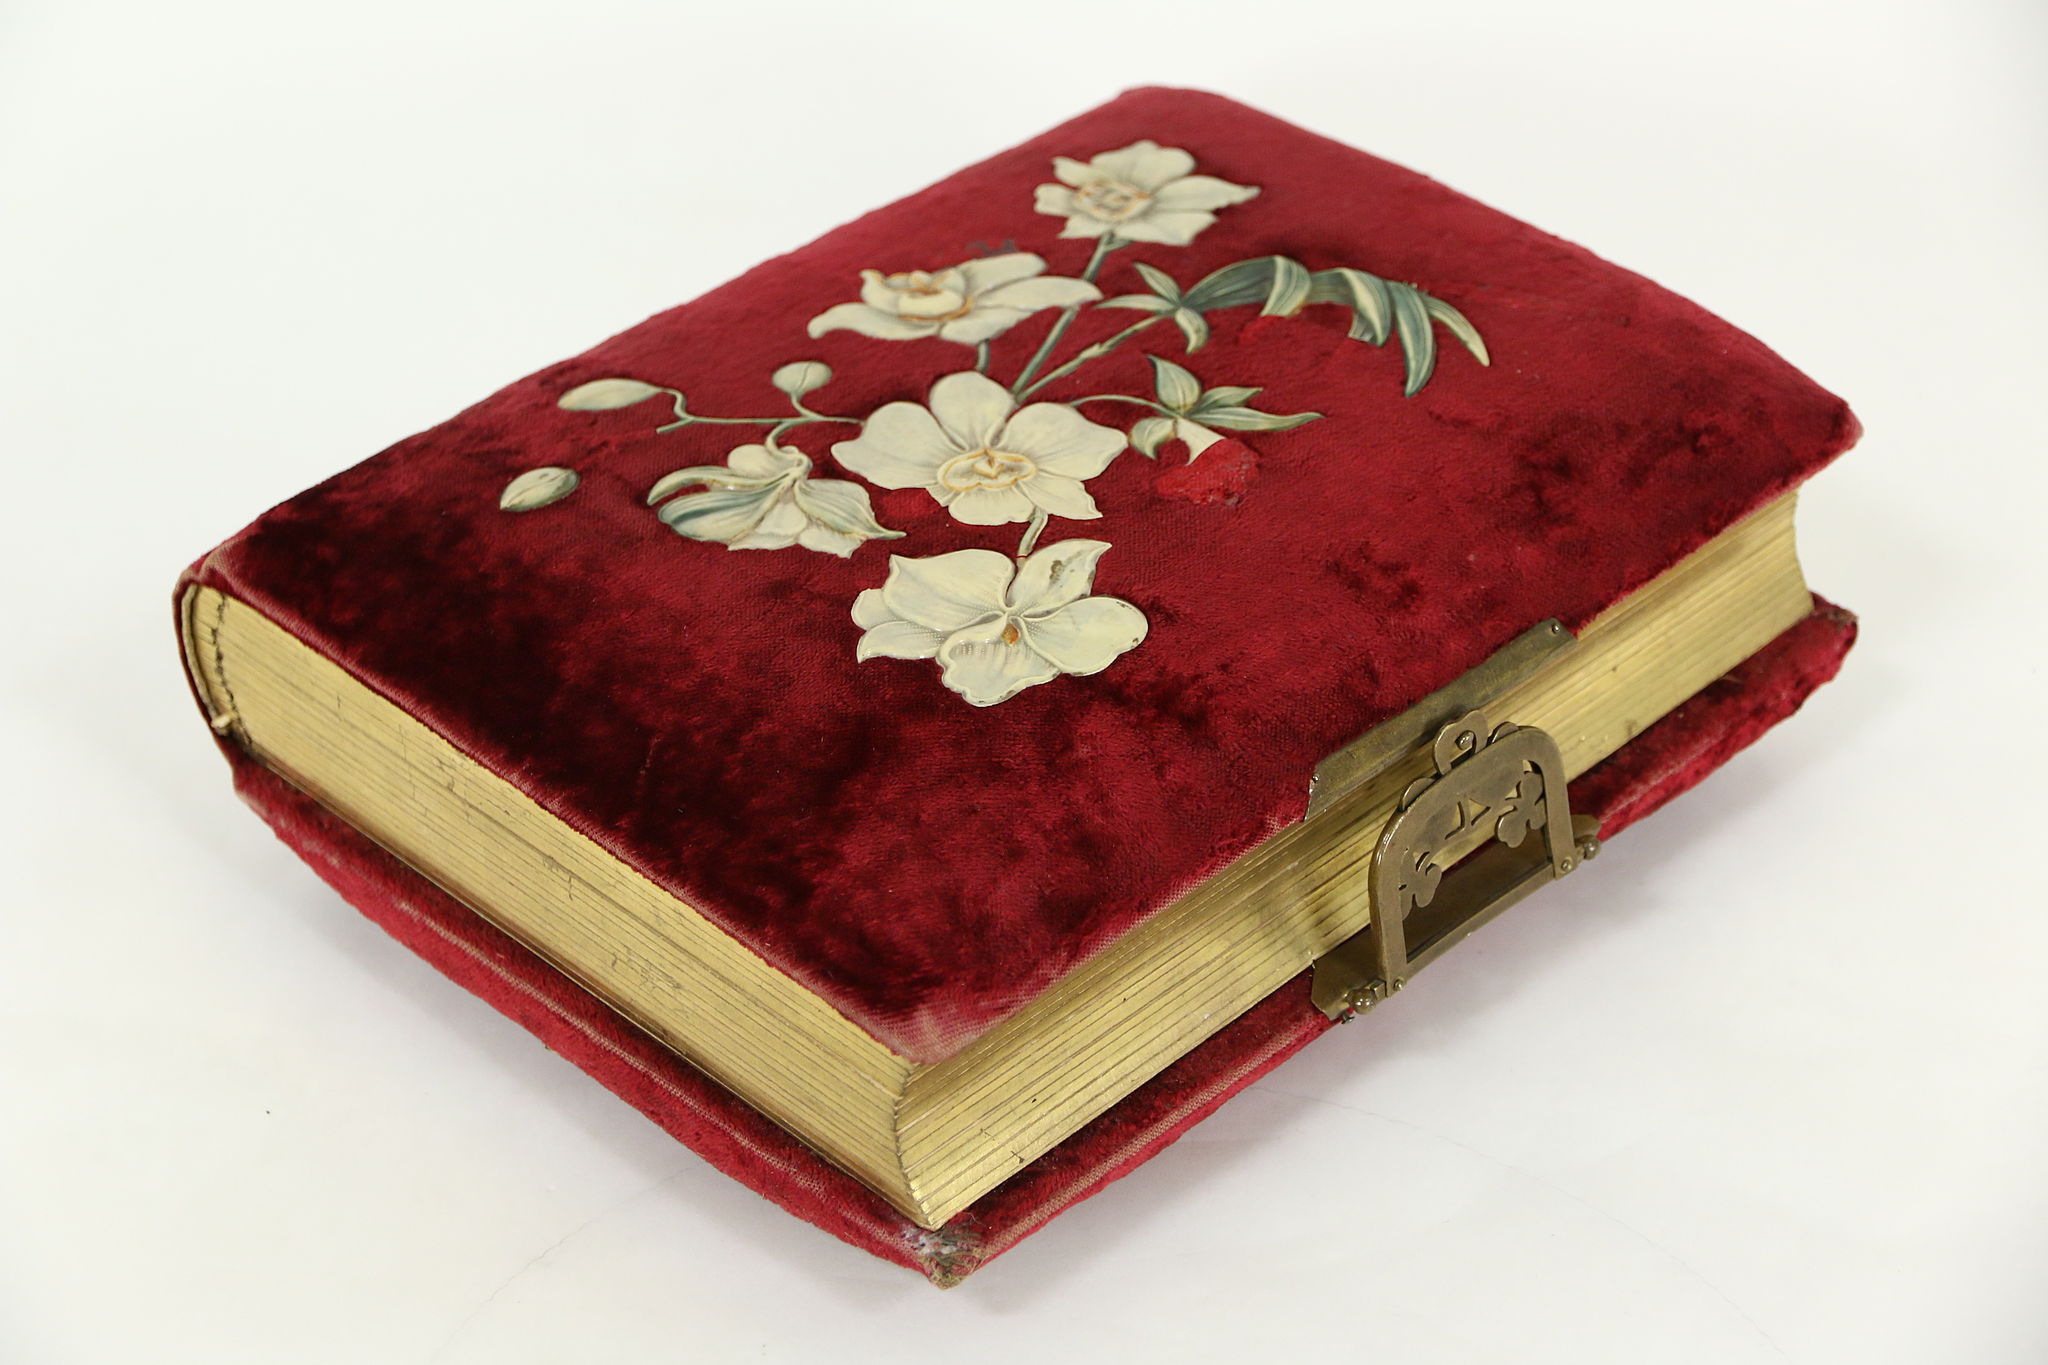 RARE Victorian Celluloid Photo Album In Excellent Condition - With Dancing  Couple Front and a Blue Velvet Design on the Back - Antique Photo Album